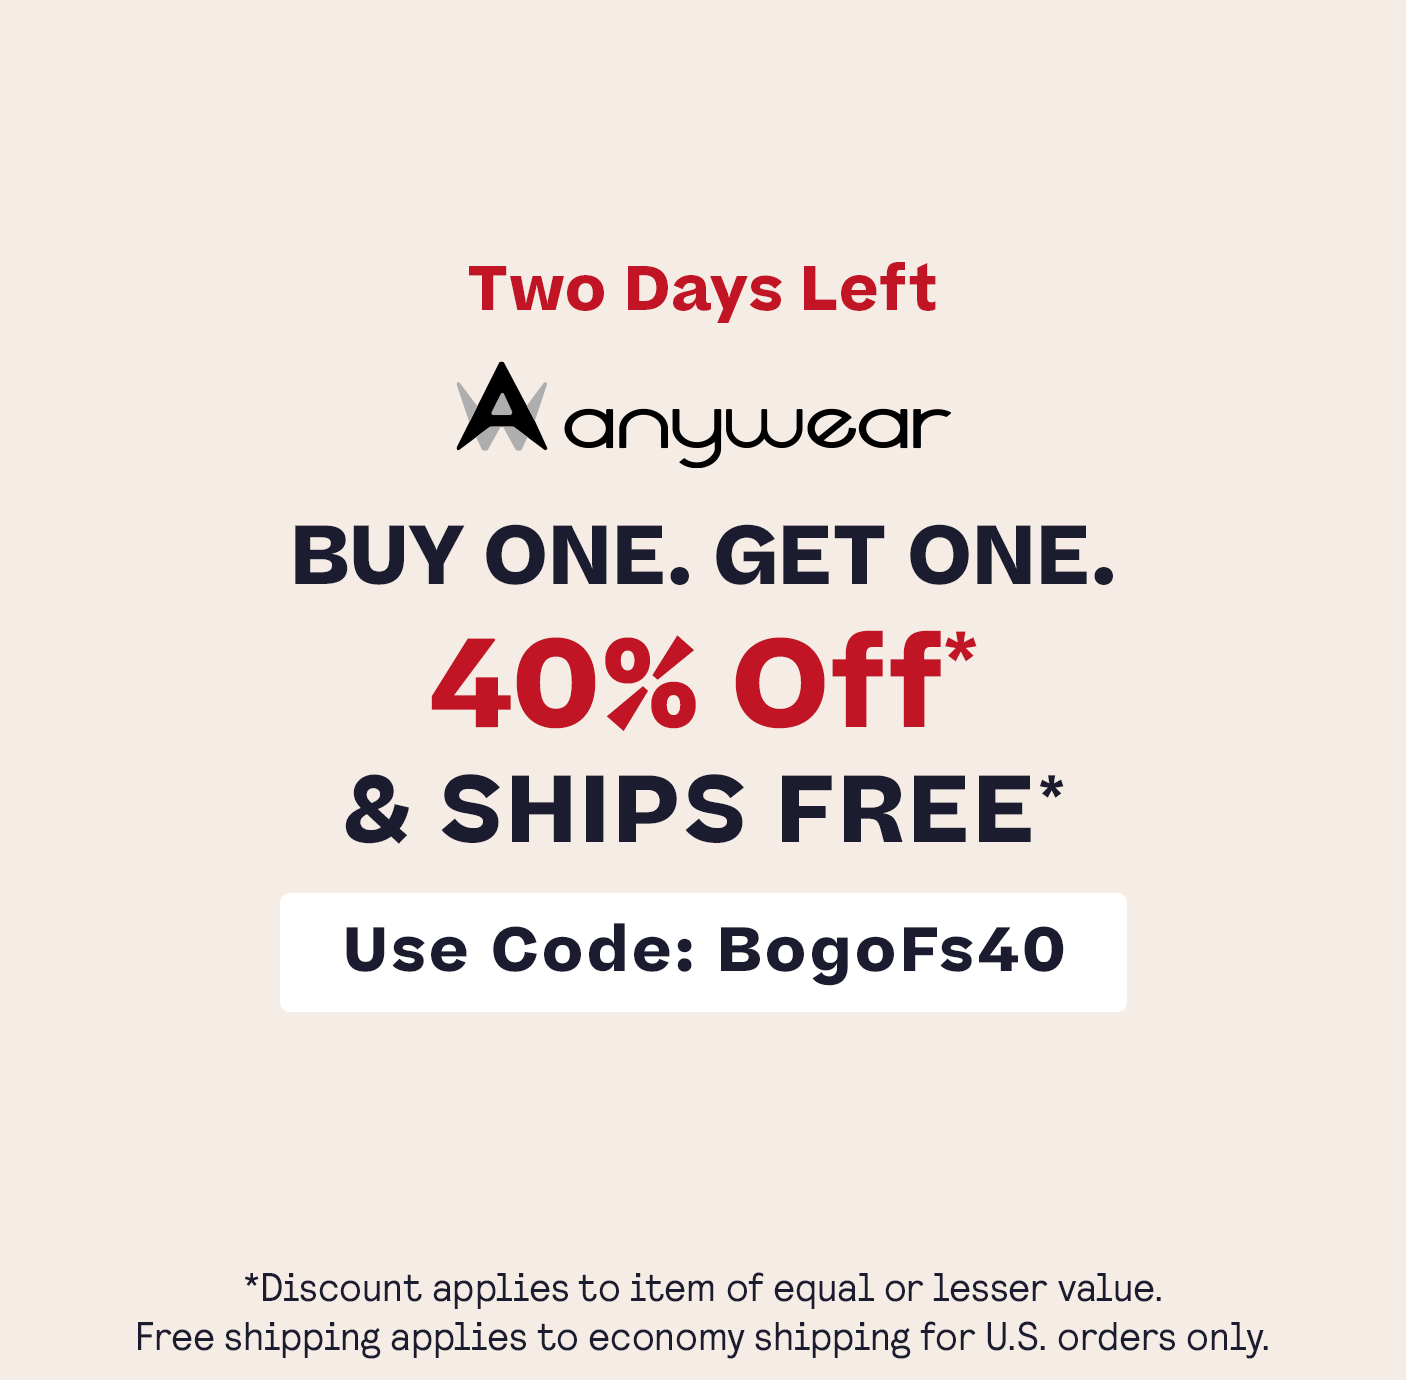 Anywear | Buy 1, Get 1 40% Off* + Free Shipping*. Code: BOGOFS40 Two Days Left